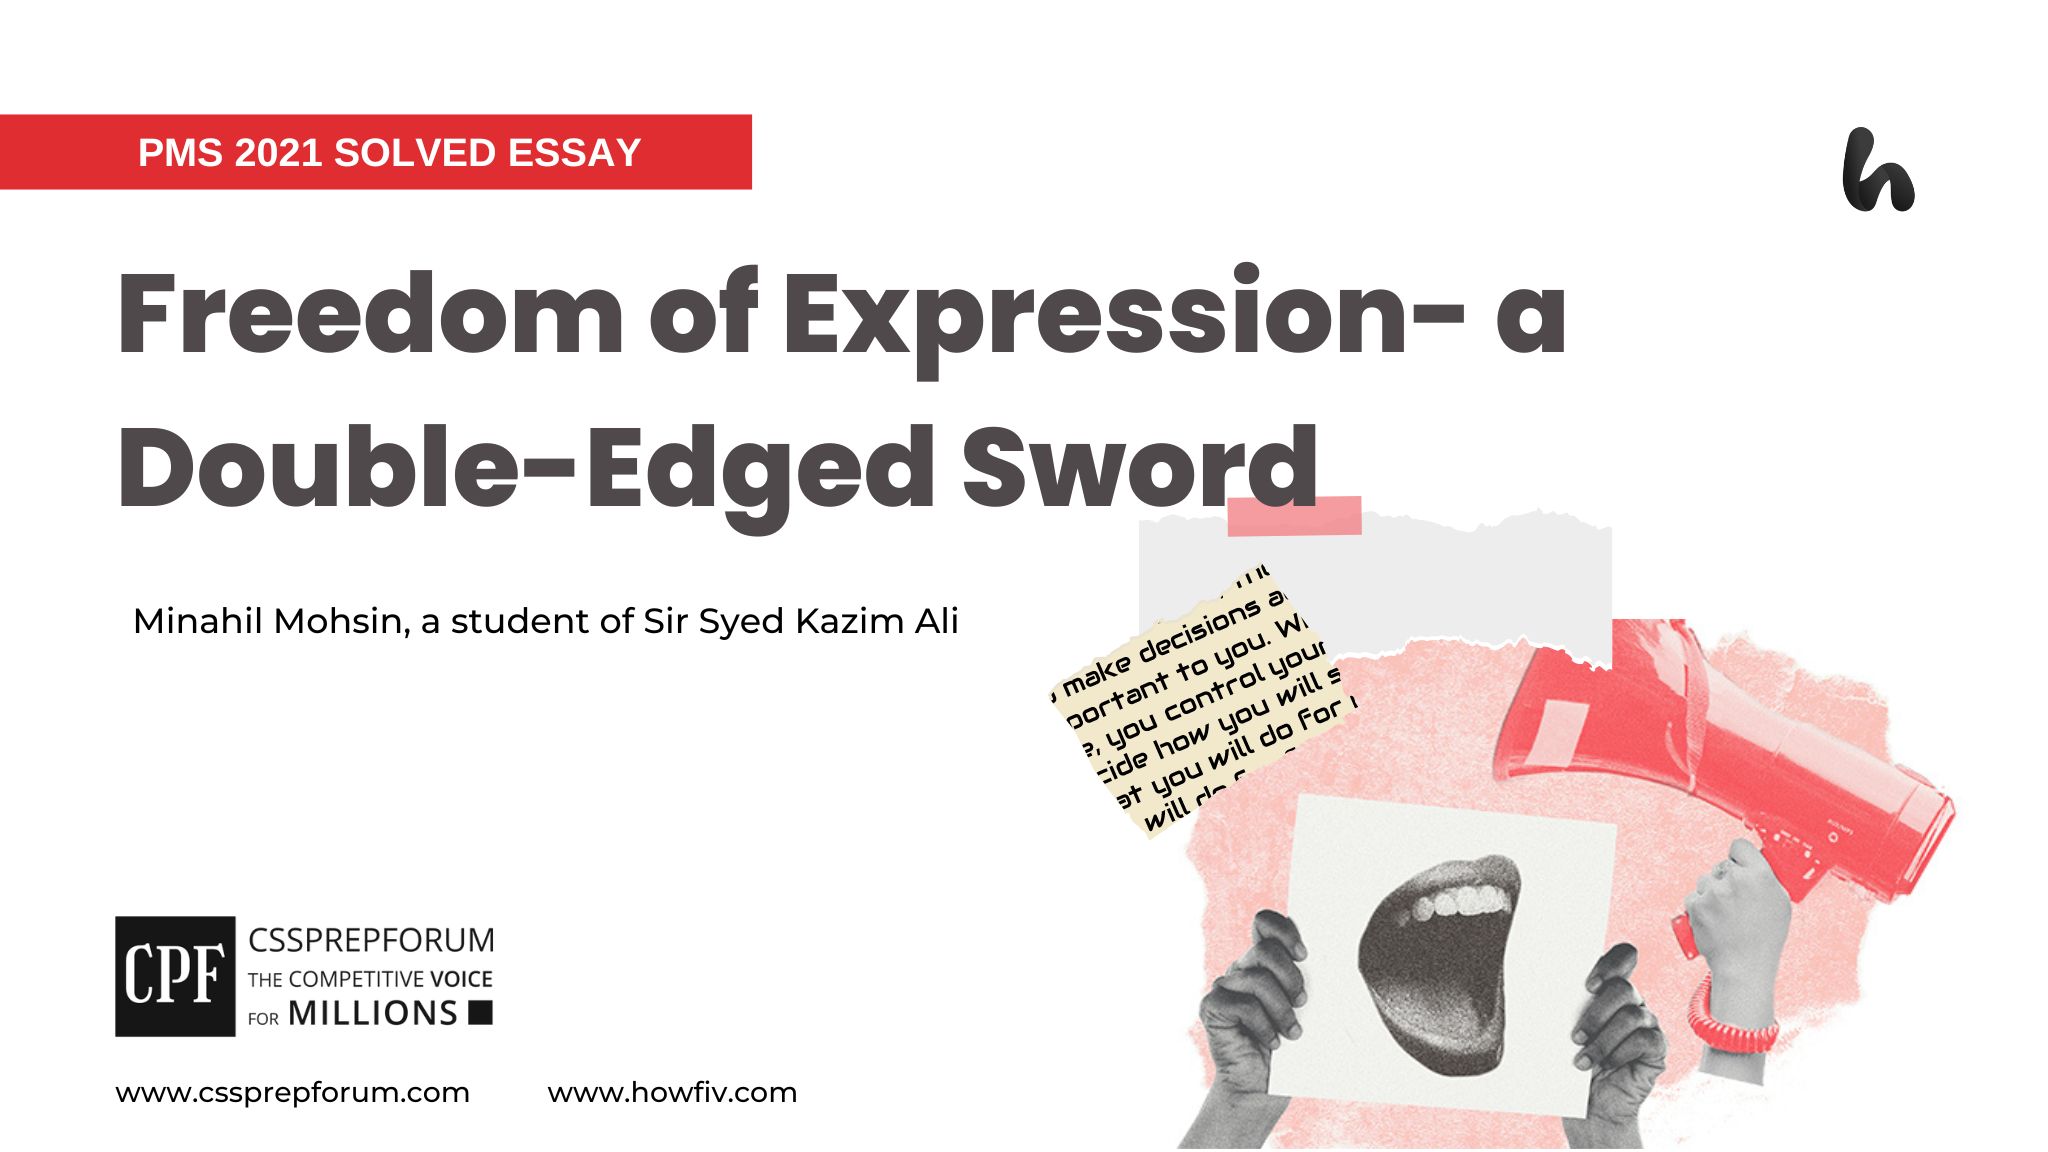 Freedom of Expression – a Double-Edged Sword by Minahil Mohsin